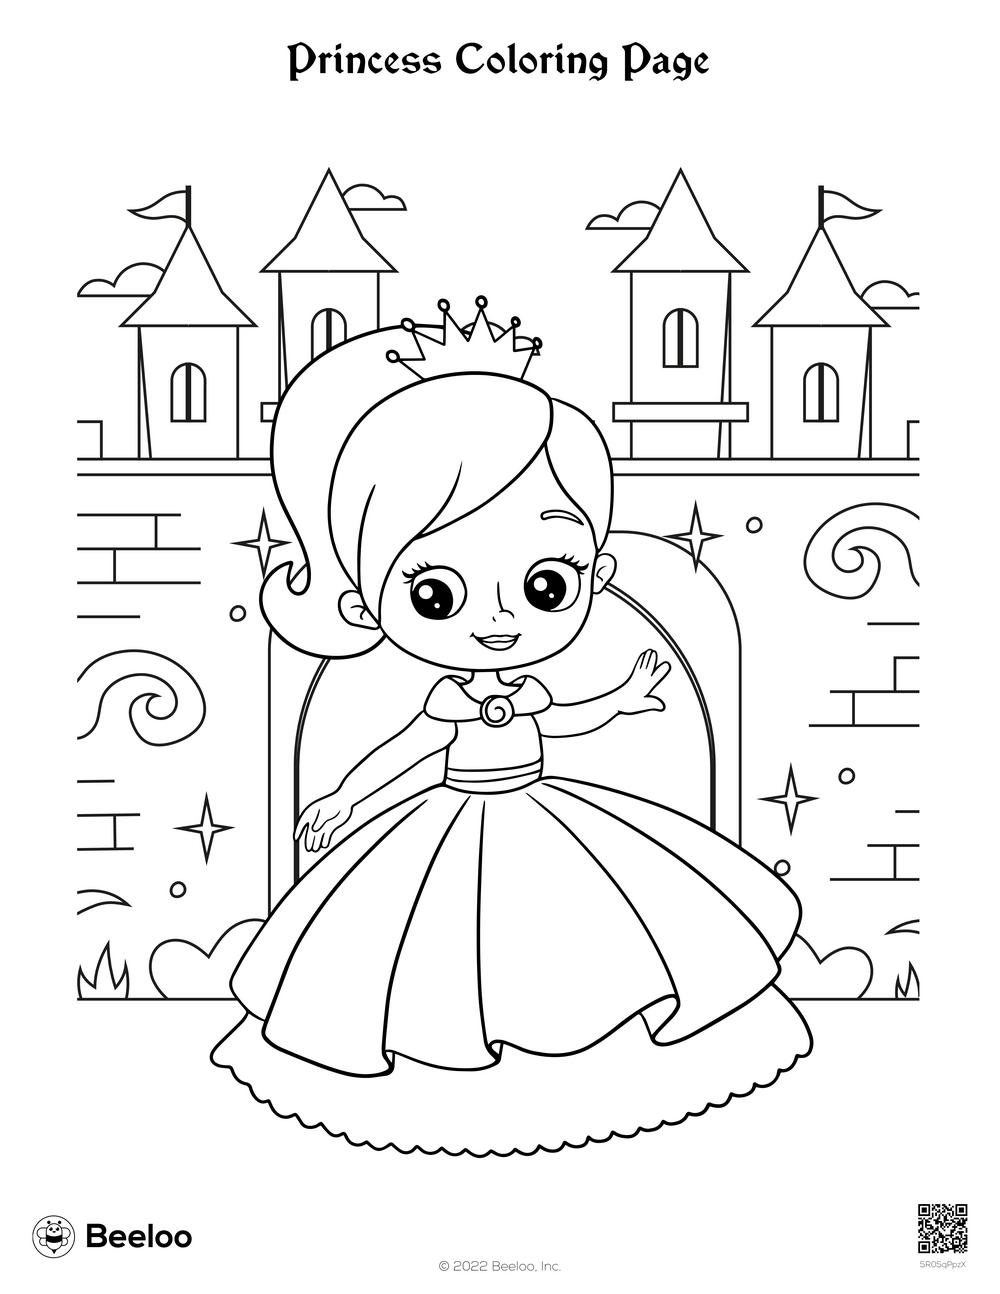 Princess coloring page â printable crafts and activities for kids